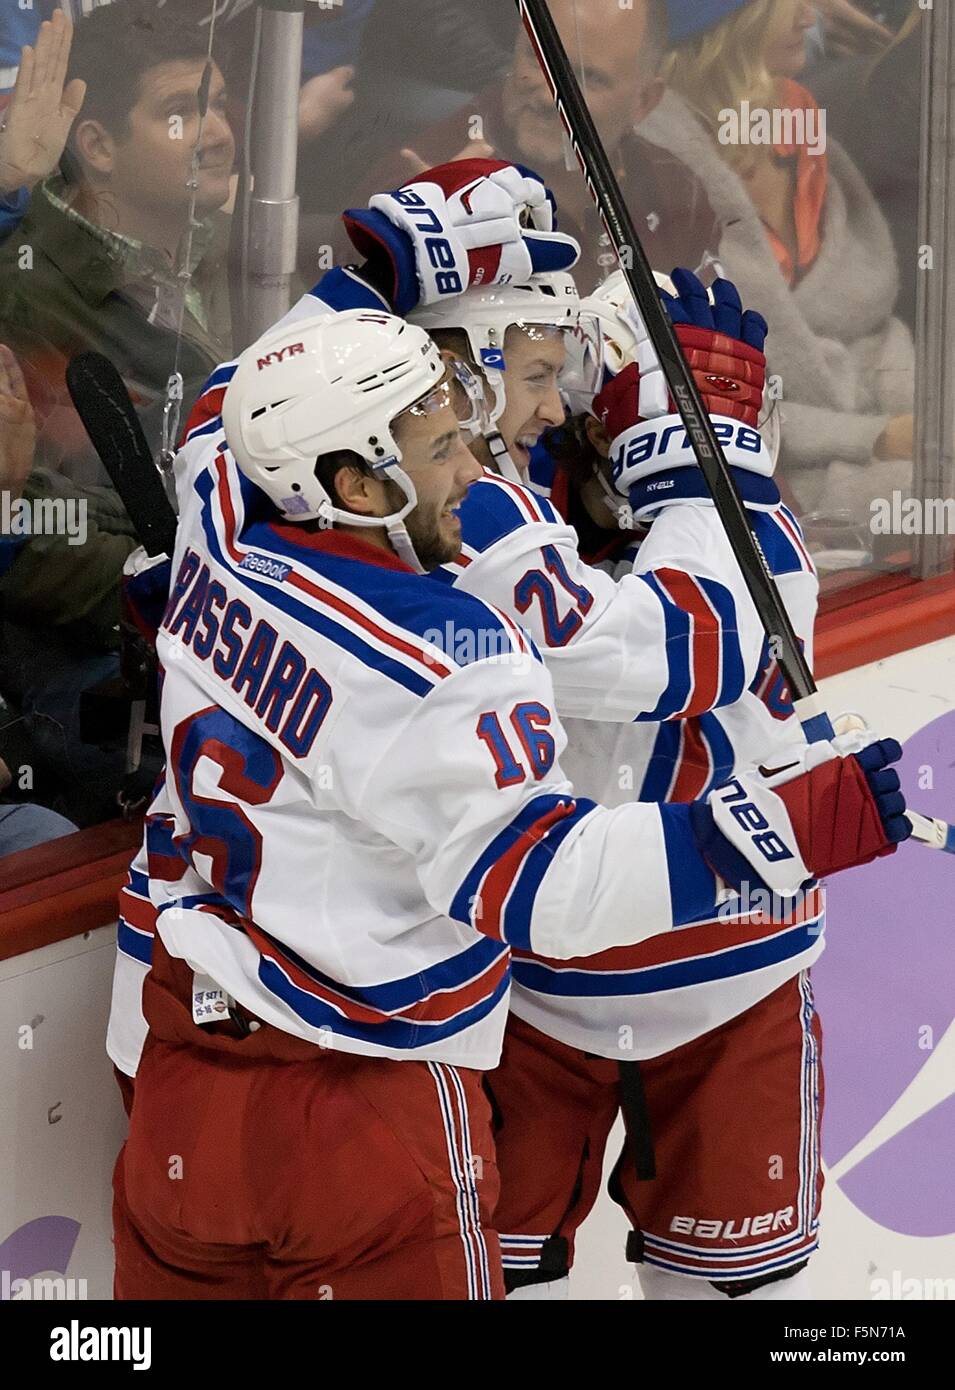 Denver, Colorado, USA. 6th Nov, 2015. Rangers C DEREK STEPAN, center, gets swarmed by his team mates during the 1st. period at the Pepsi Center Friday night. The Avs lose to the Rangers 2-1. Credit:  Hector Acevedo/ZUMA Wire/Alamy Live News Stock Photo